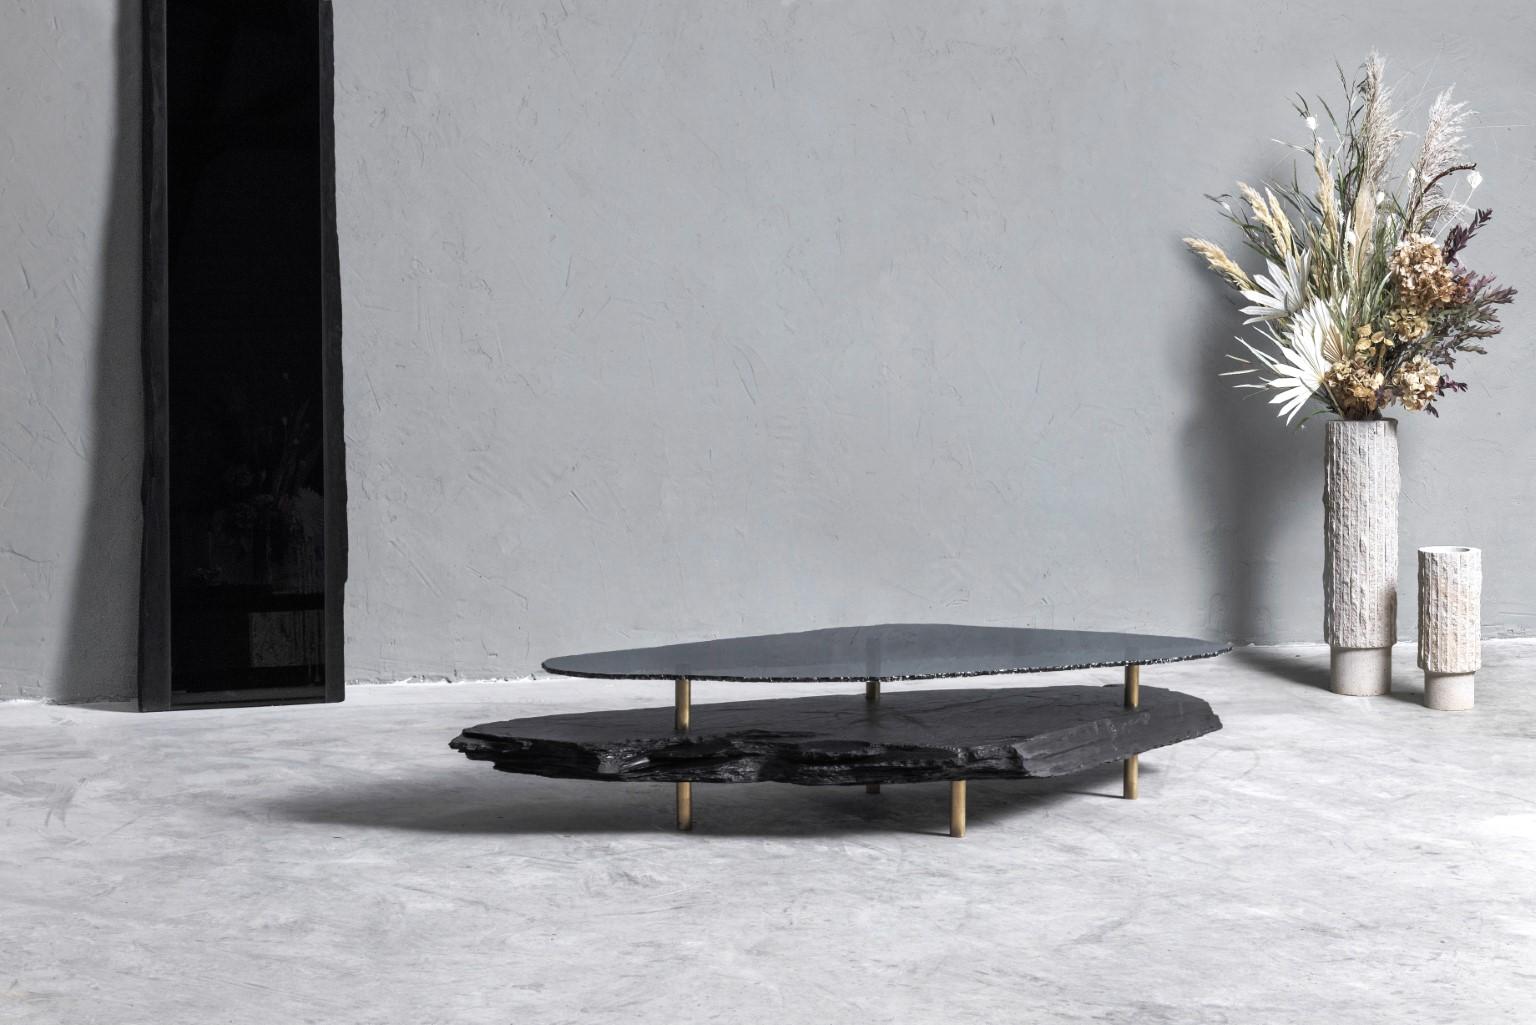 Unique slate sculpted coffee table by Frederic Saulou
Hardie 
Coffee table
Black slate, grey smocked mirror
Measures: L 195 x W 80 x H 34 cm, approximately 500 kg
Unique piece: 1 / 1 
Signed and numbered.

